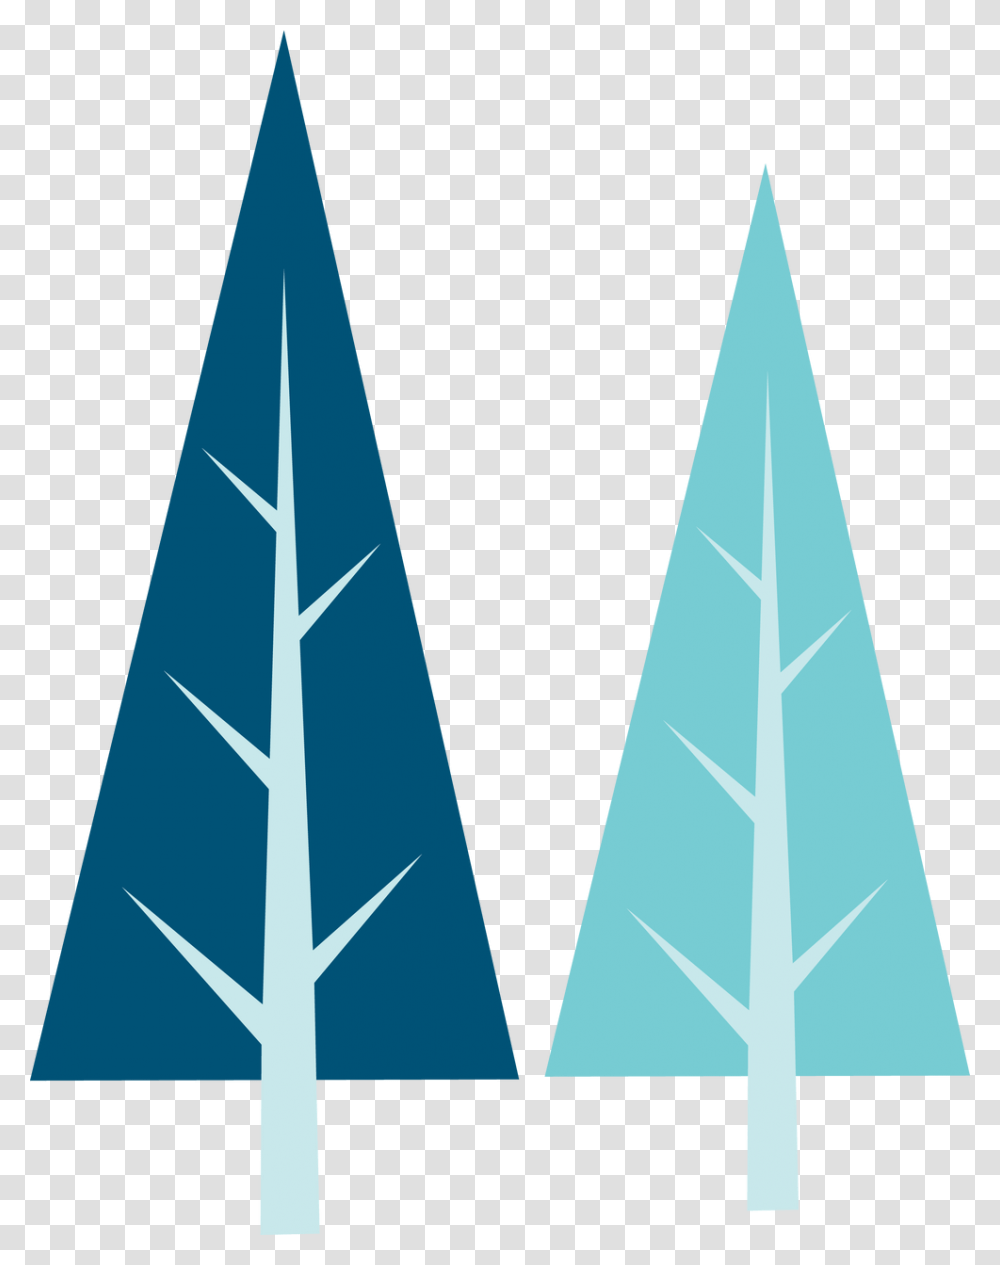 Celebrate Winter Trees Svg Cut File Blue Winter Trees, Triangle, Cone, Plant, Arrowhead Transparent Png